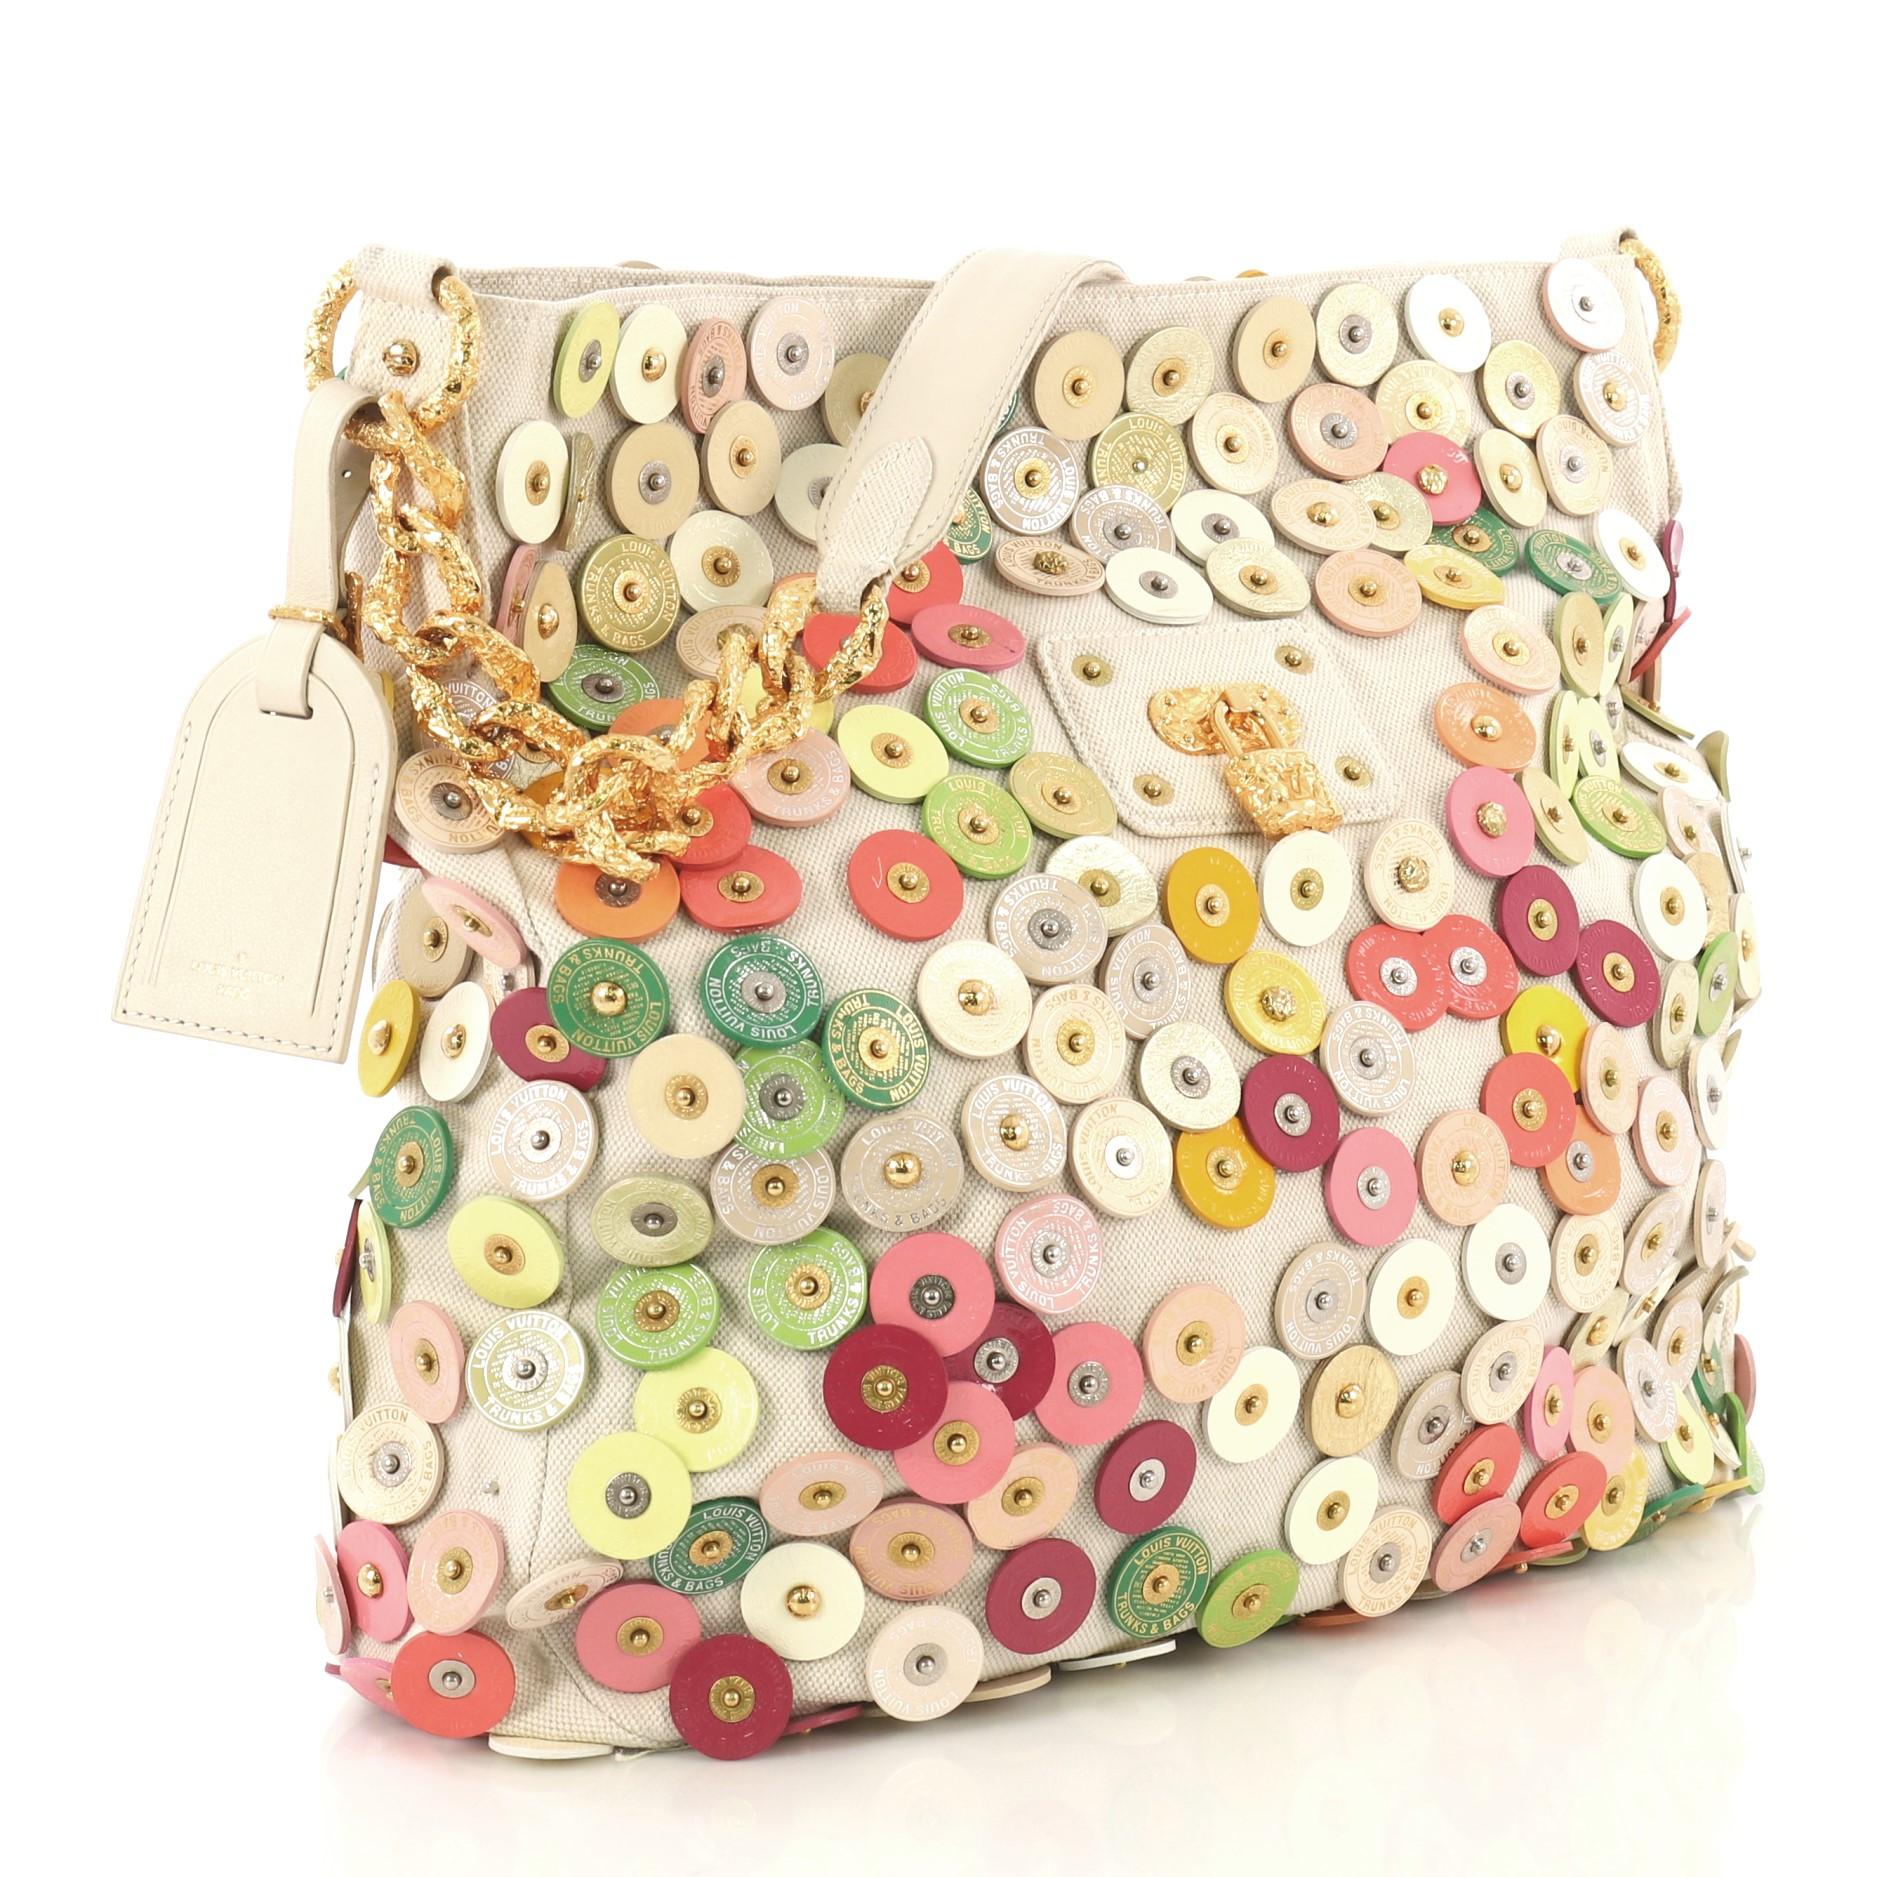 This Louis Vuitton Polka Dot Fleur Morgane Handbag Embellished Canvas, crafted in white multicolor embellished canvas, features chain link strap and gold-tone hardware. Its magnetic snap closure opens to a tan fabric interior with zip pocket.